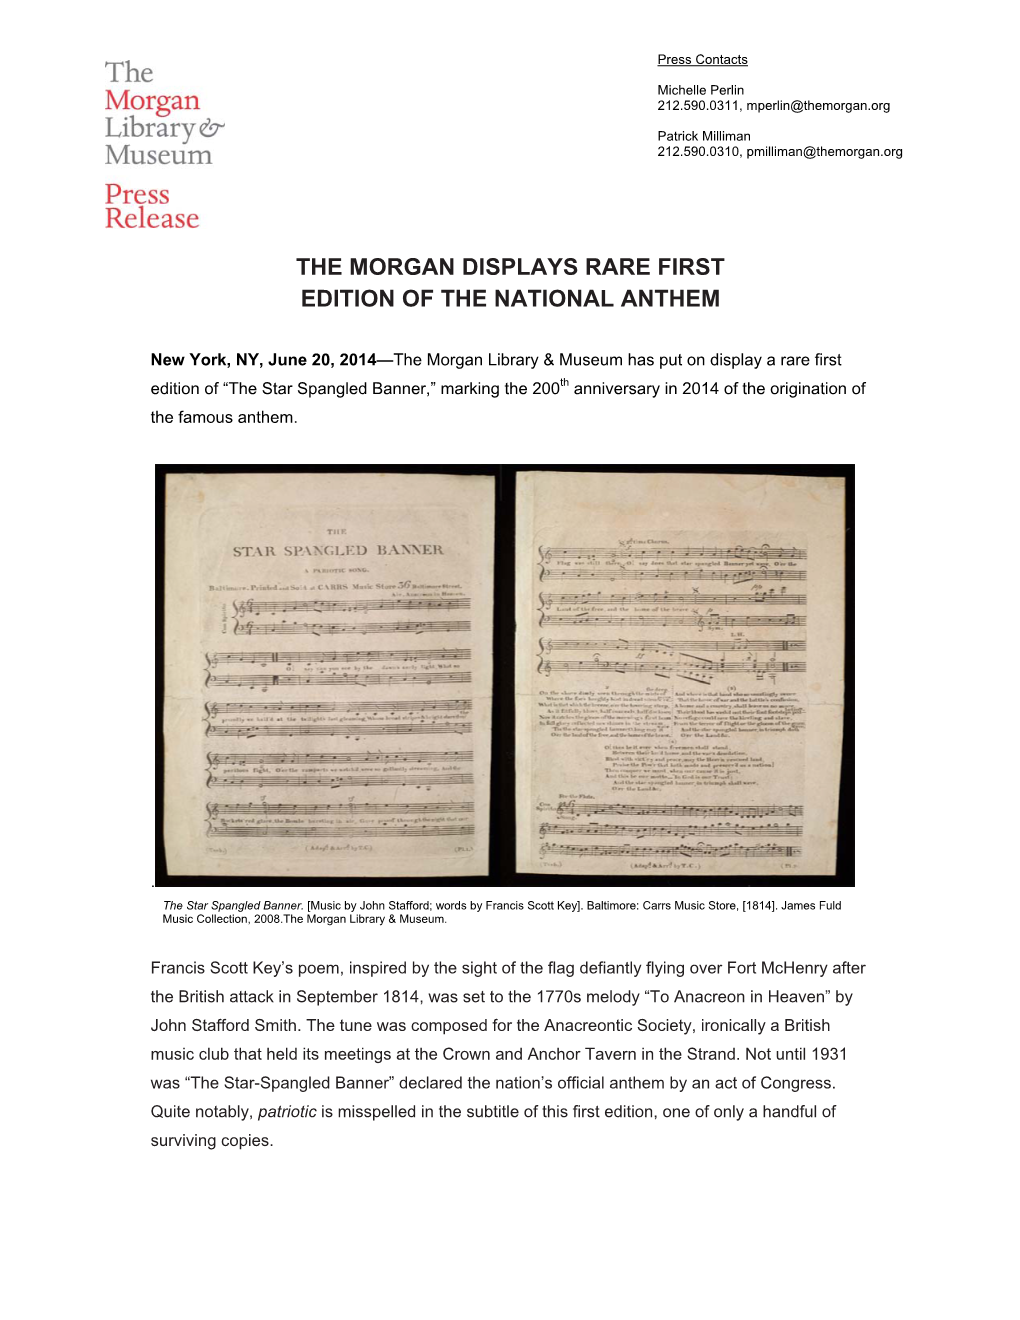 The Morgan Displays Rare First Edition of the National Anthem